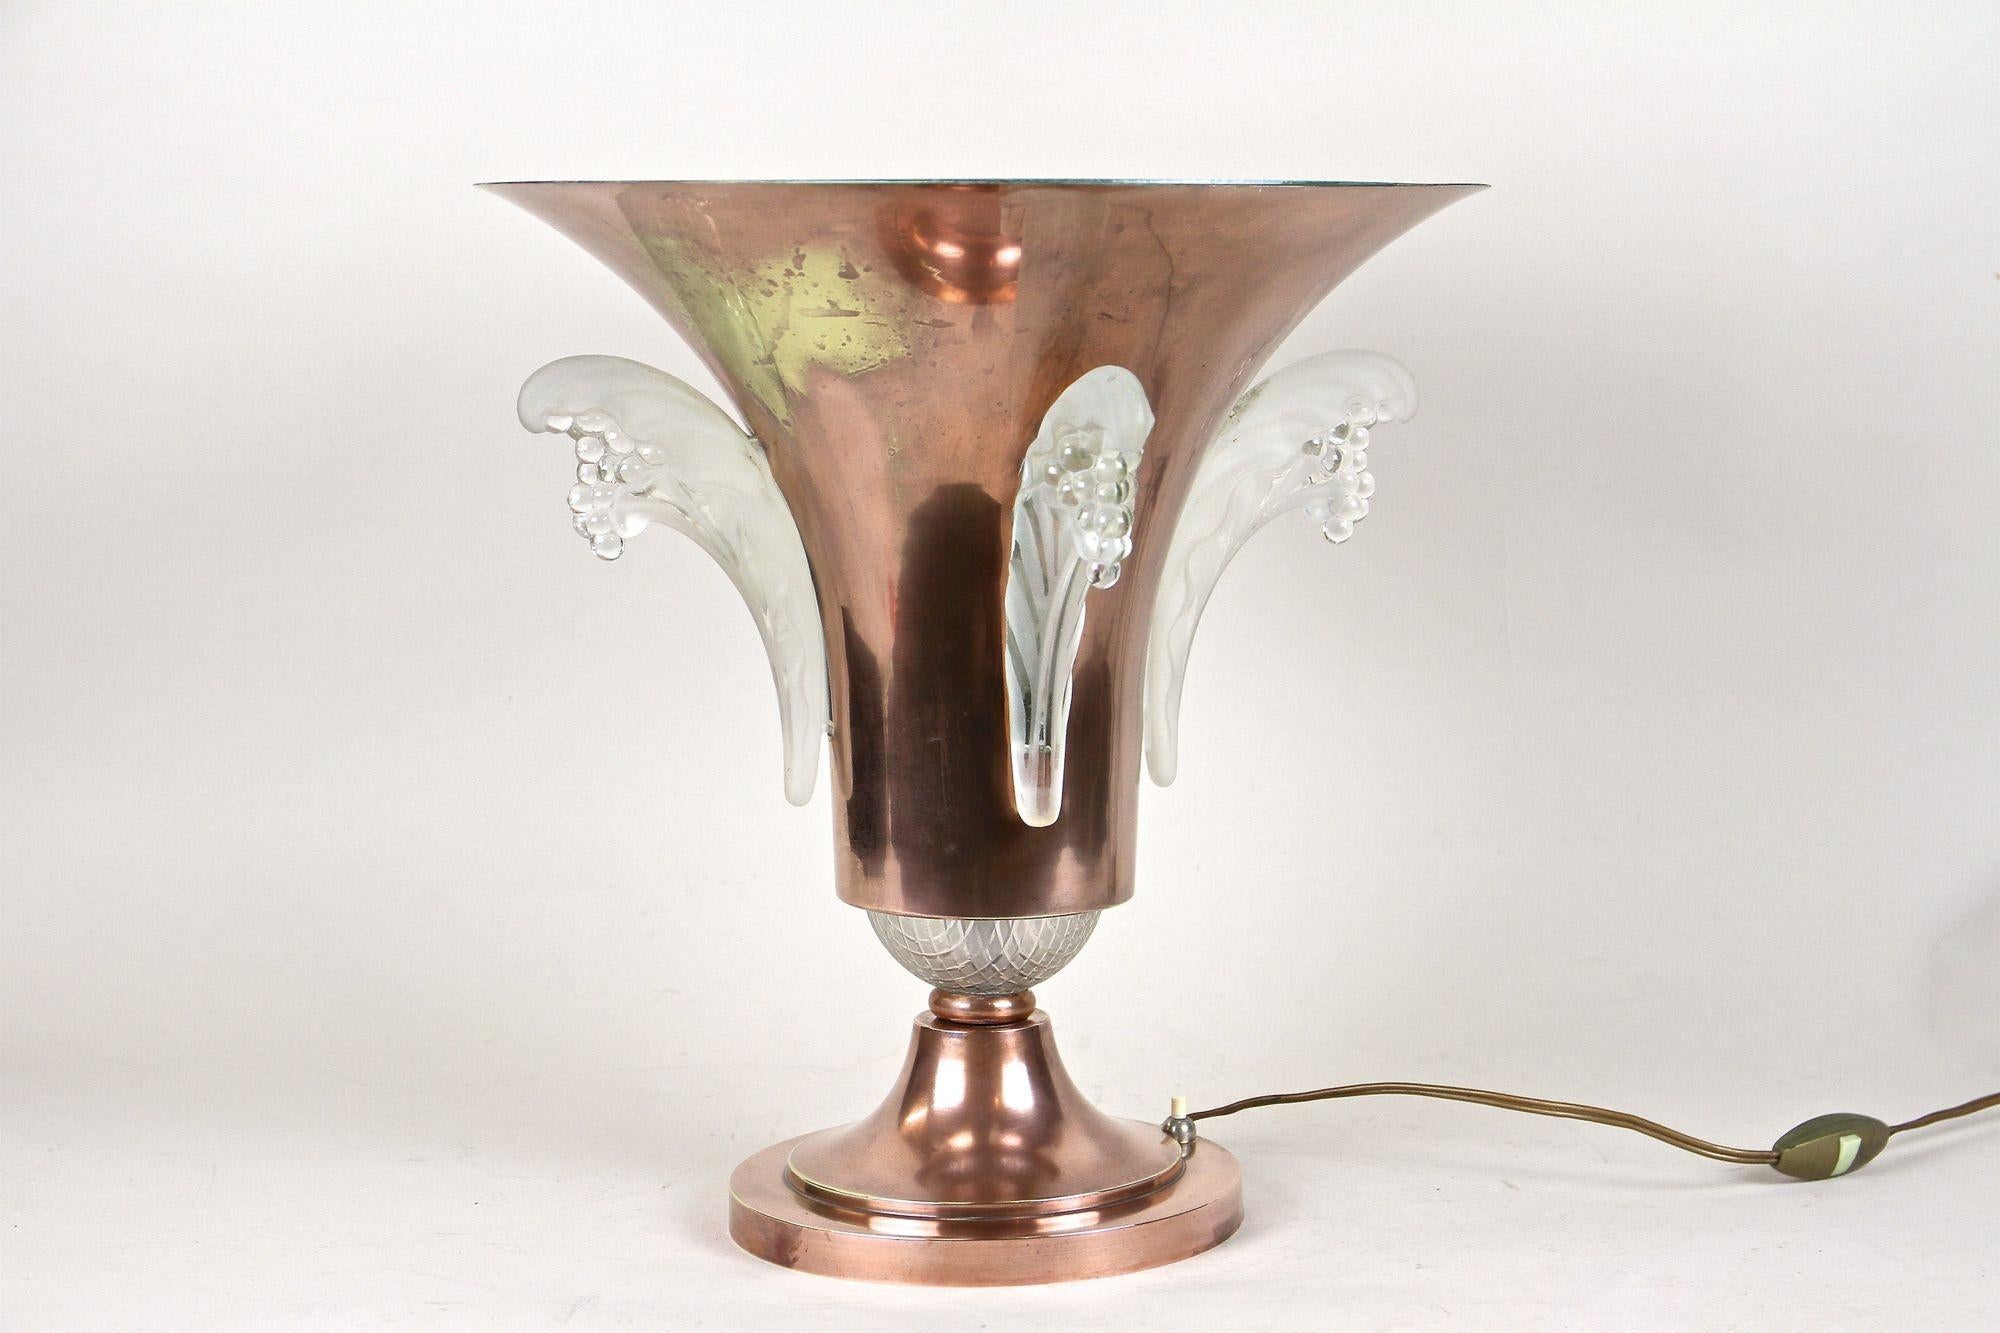 Art Deco Copper Table Lamp with Lalique Glass Elements, France, circa 1925 For Sale 1